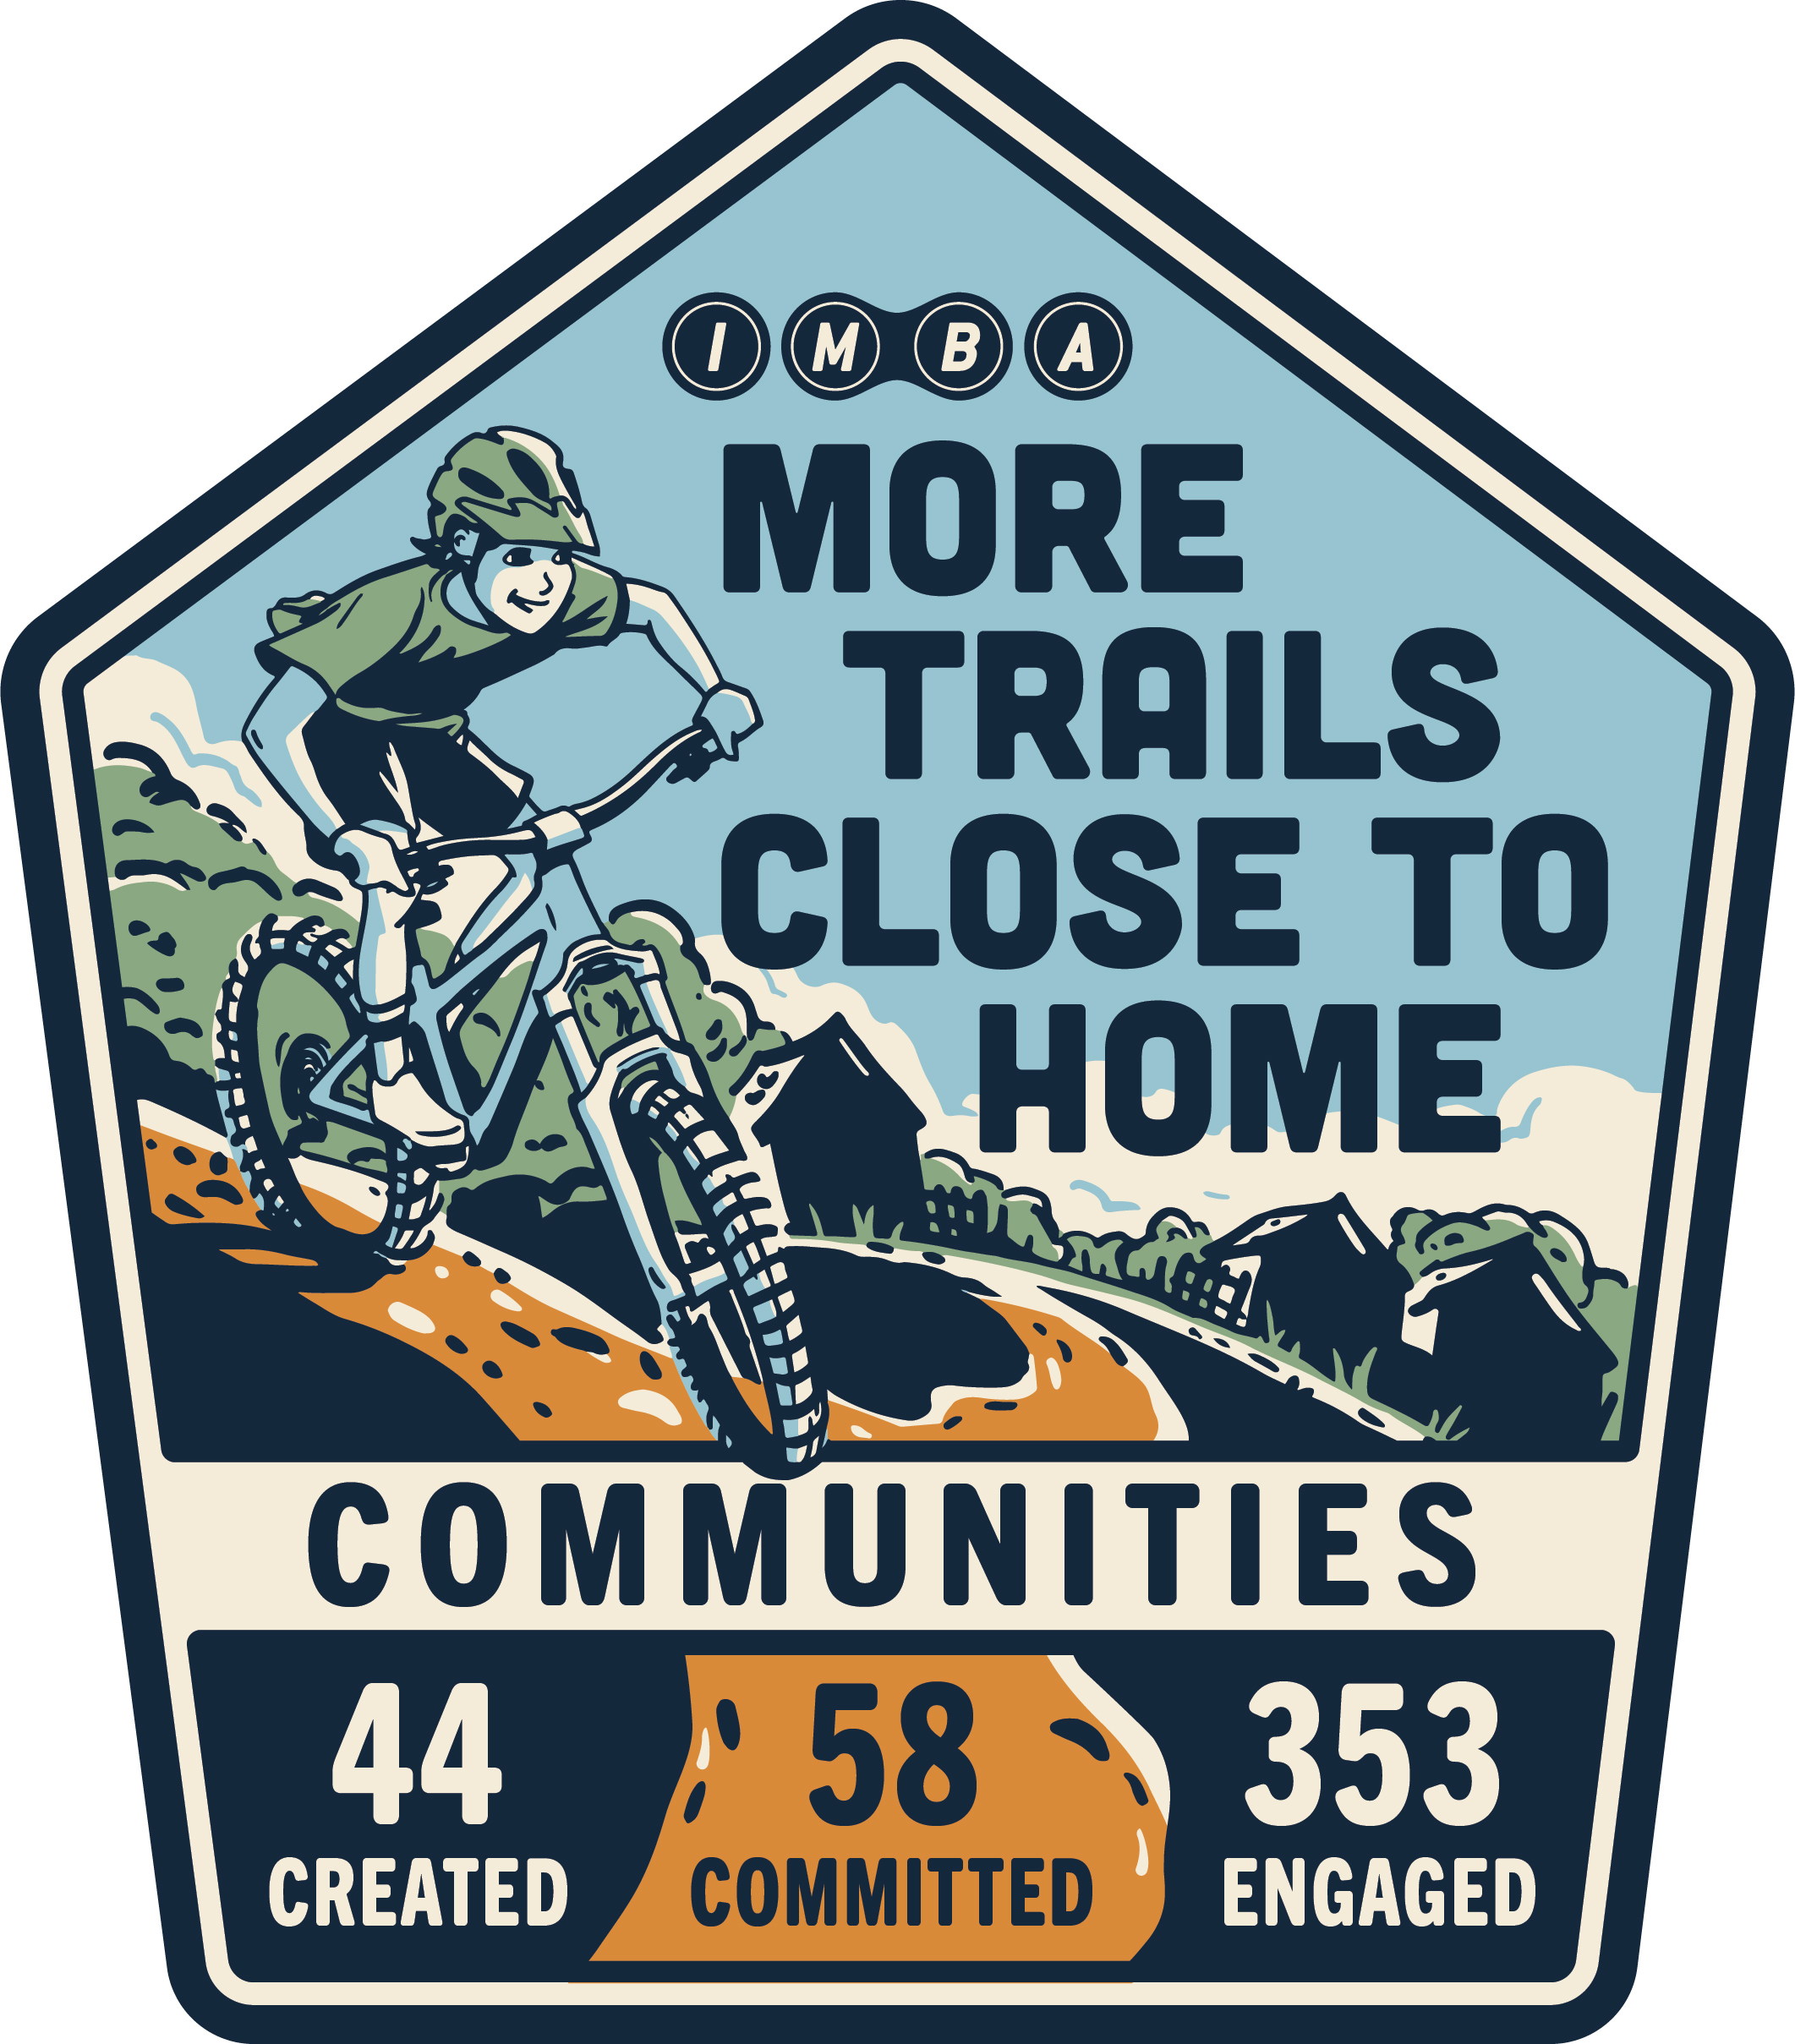 A badge for More Trails Close to Home shows the image of a mountain biker on a trail and notes 38 communities where trails have been created, 41 have committed, and 335 have engaged in the process.